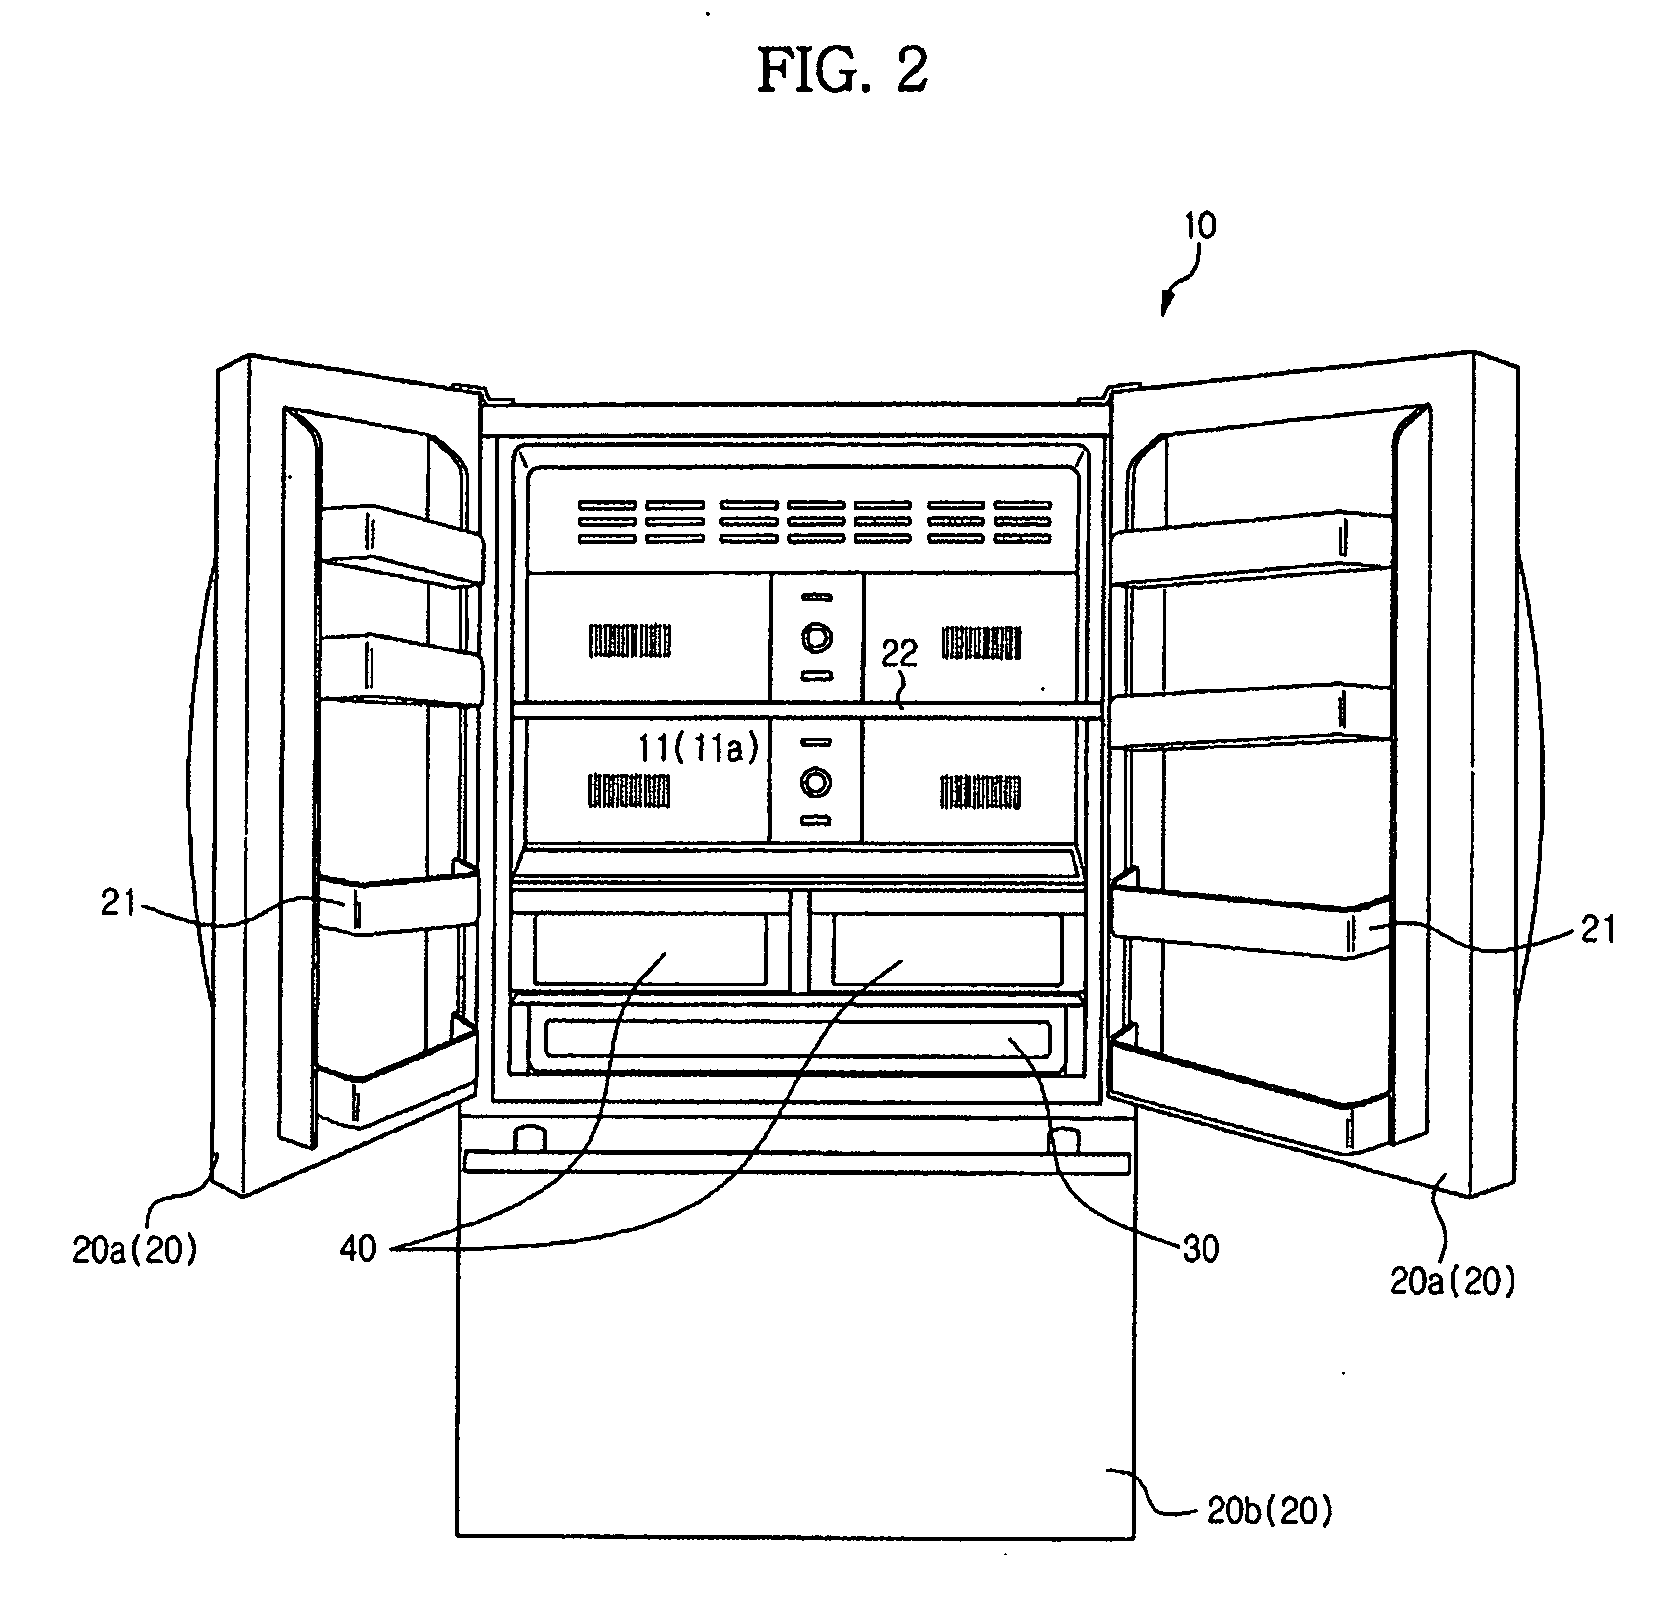 Refrigerator with receiving box